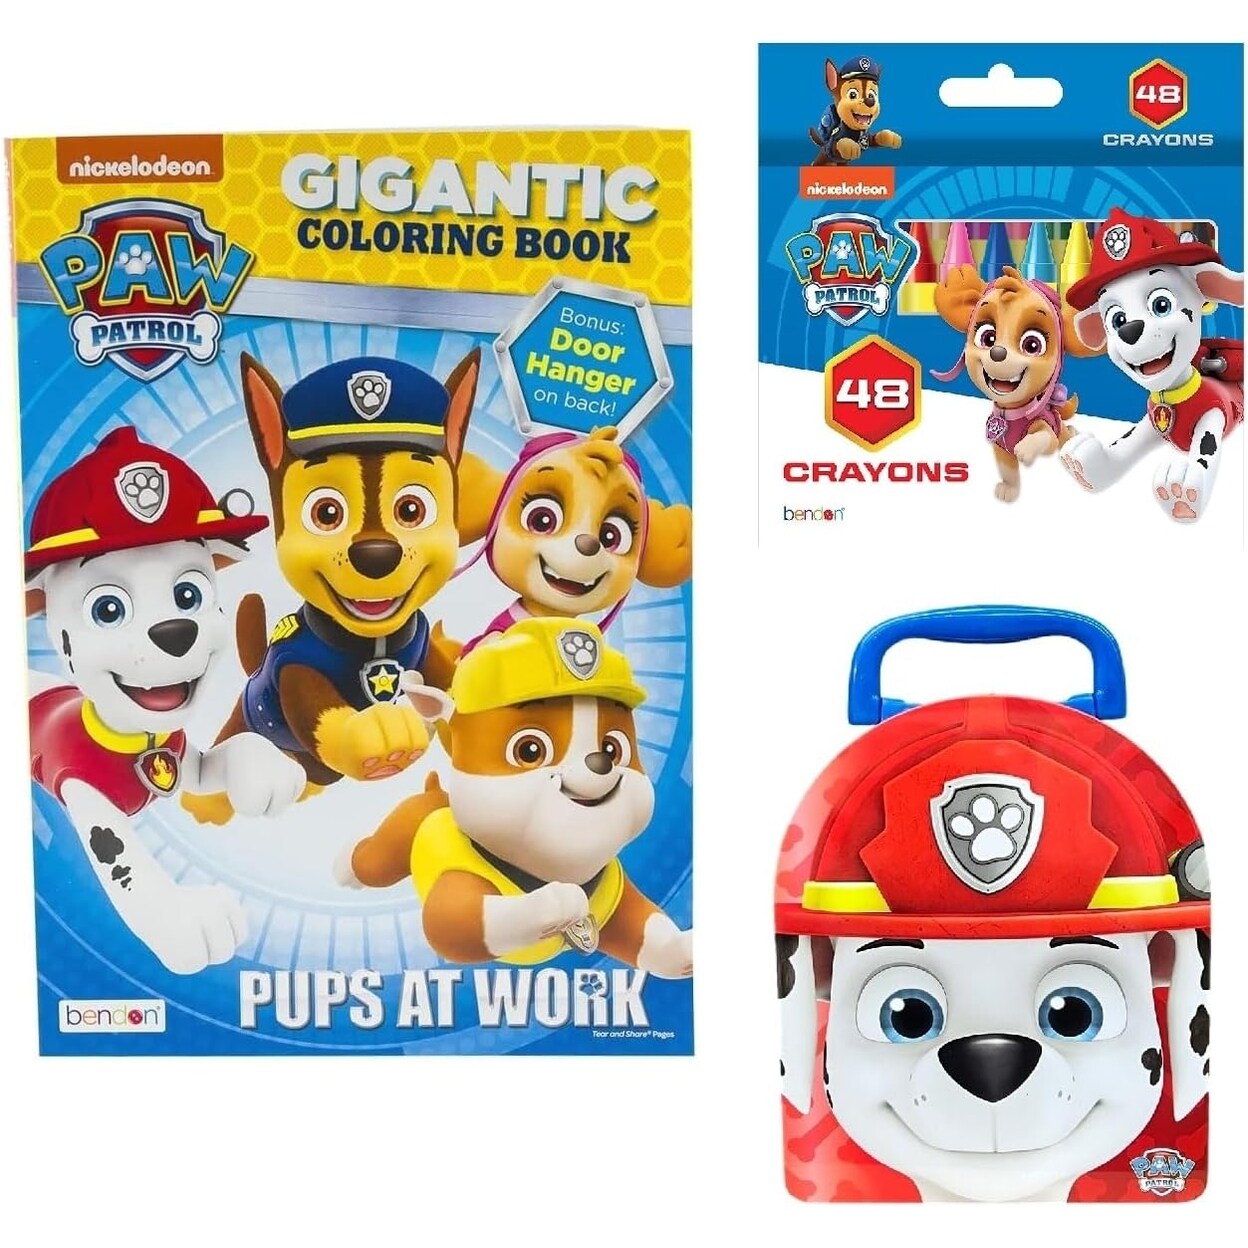 Bendon Publishing Paw Patrol Coloring Book Gift Set for Kids with 192 Coloring Pages 48 Crayons Storage Tin (Marshall)